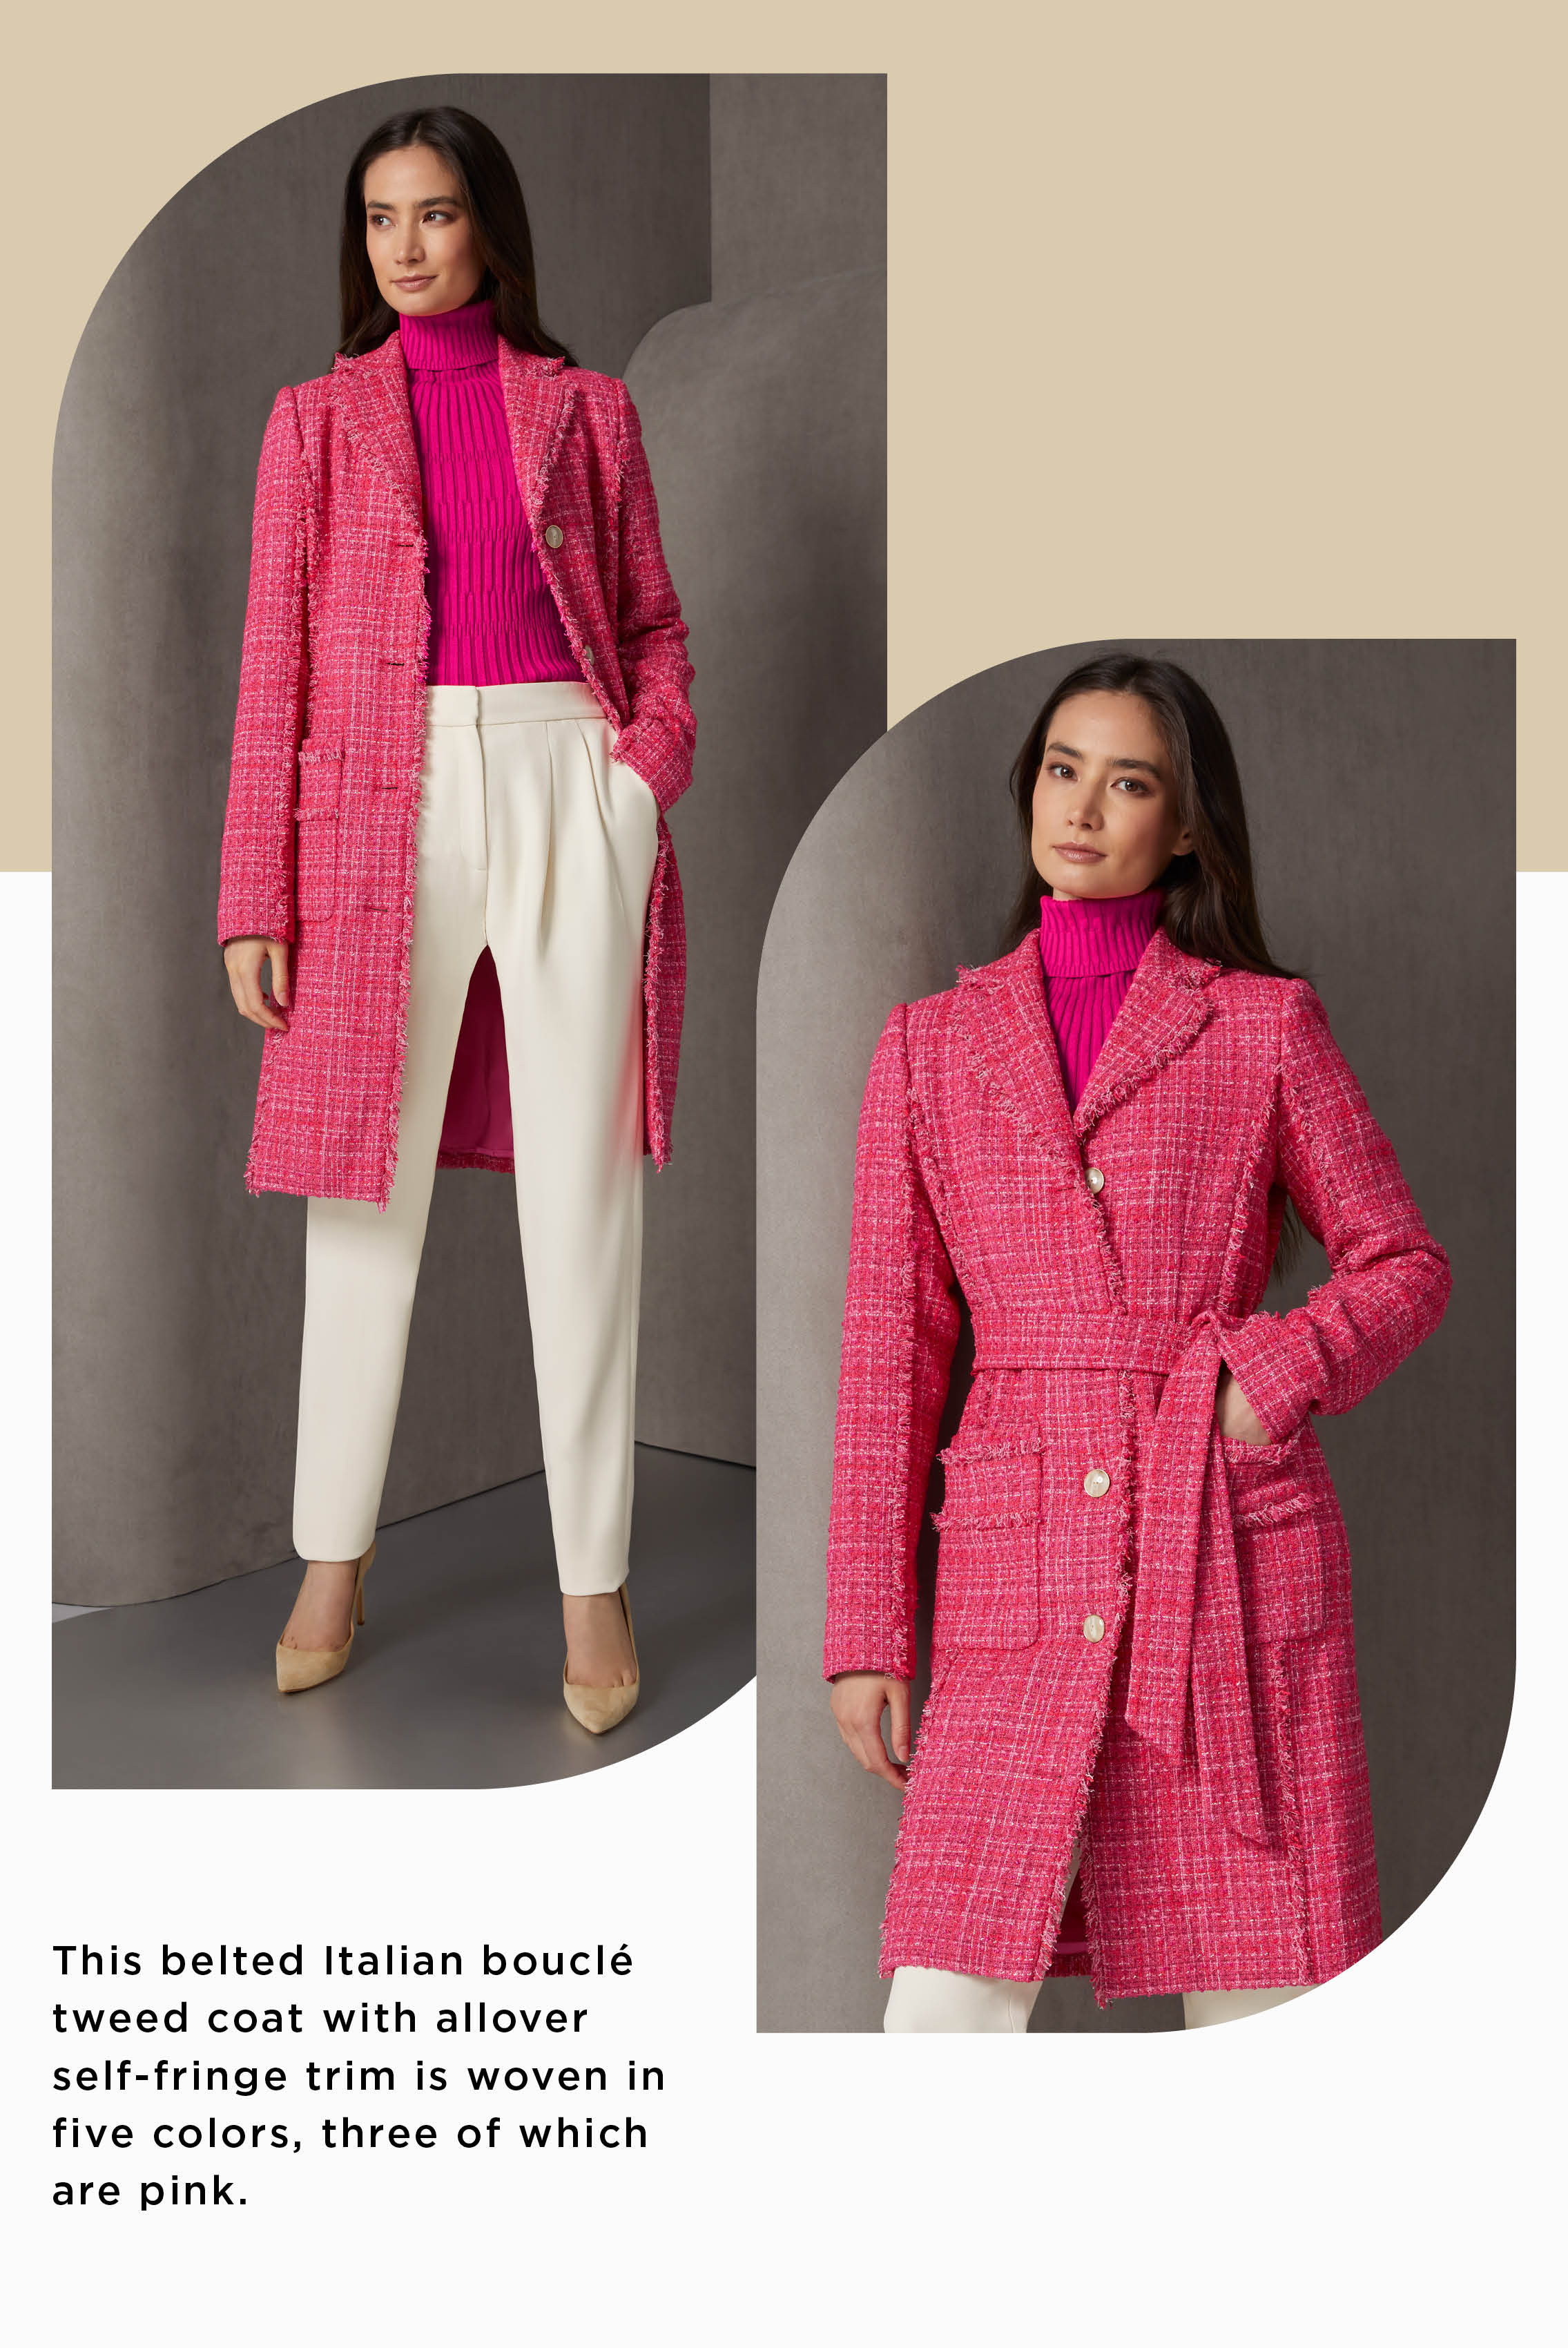 This belted Italian bouclé tweed coat with allover self-fringe trim is woven in five colors, three of which are pink. The silky matching pink turtleneck is knit in a radiating piano key rib for opulent contrast texture.